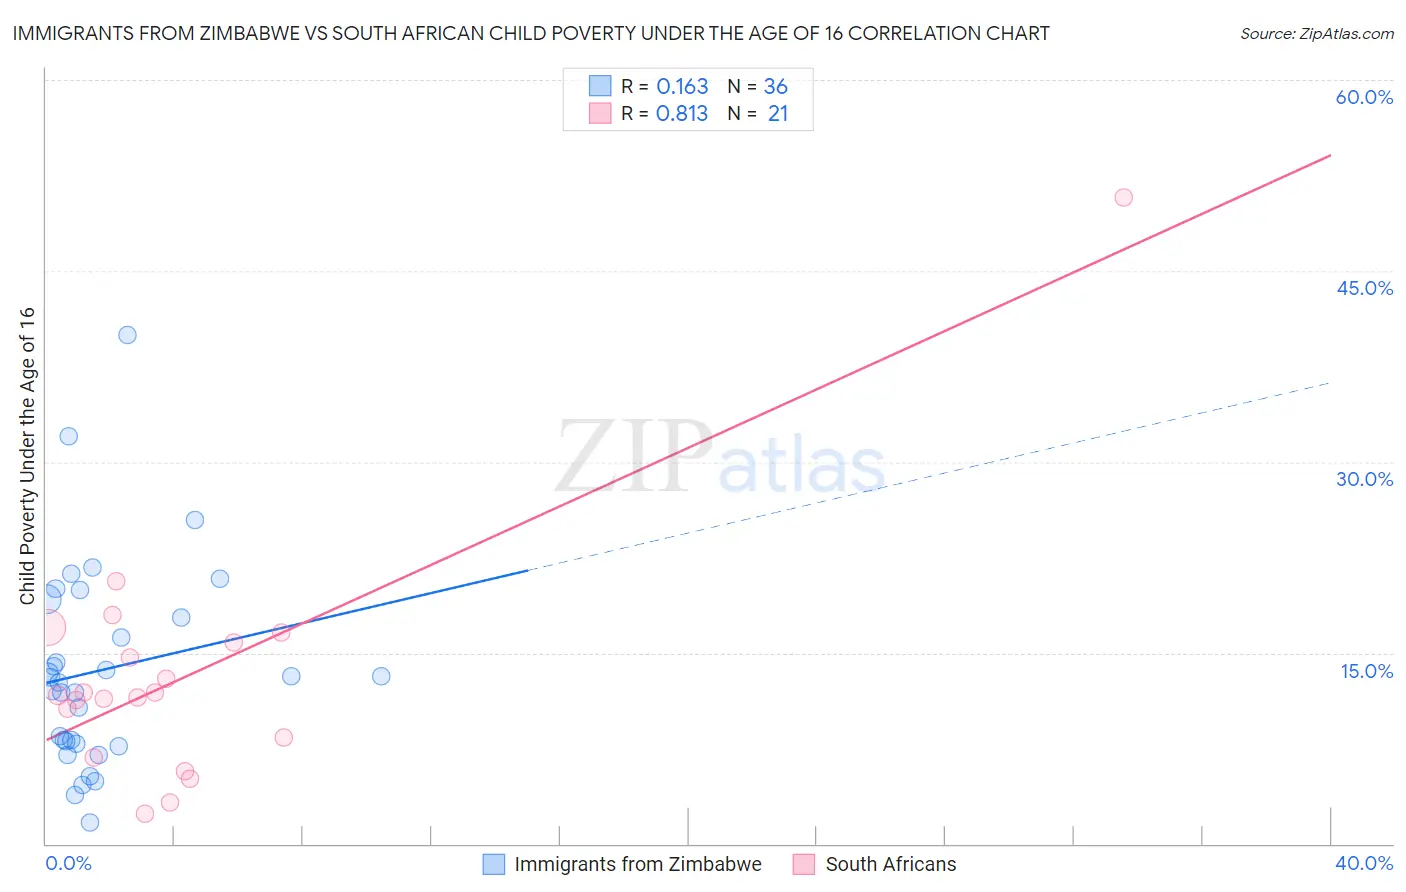 Immigrants from Zimbabwe vs South African Child Poverty Under the Age of 16